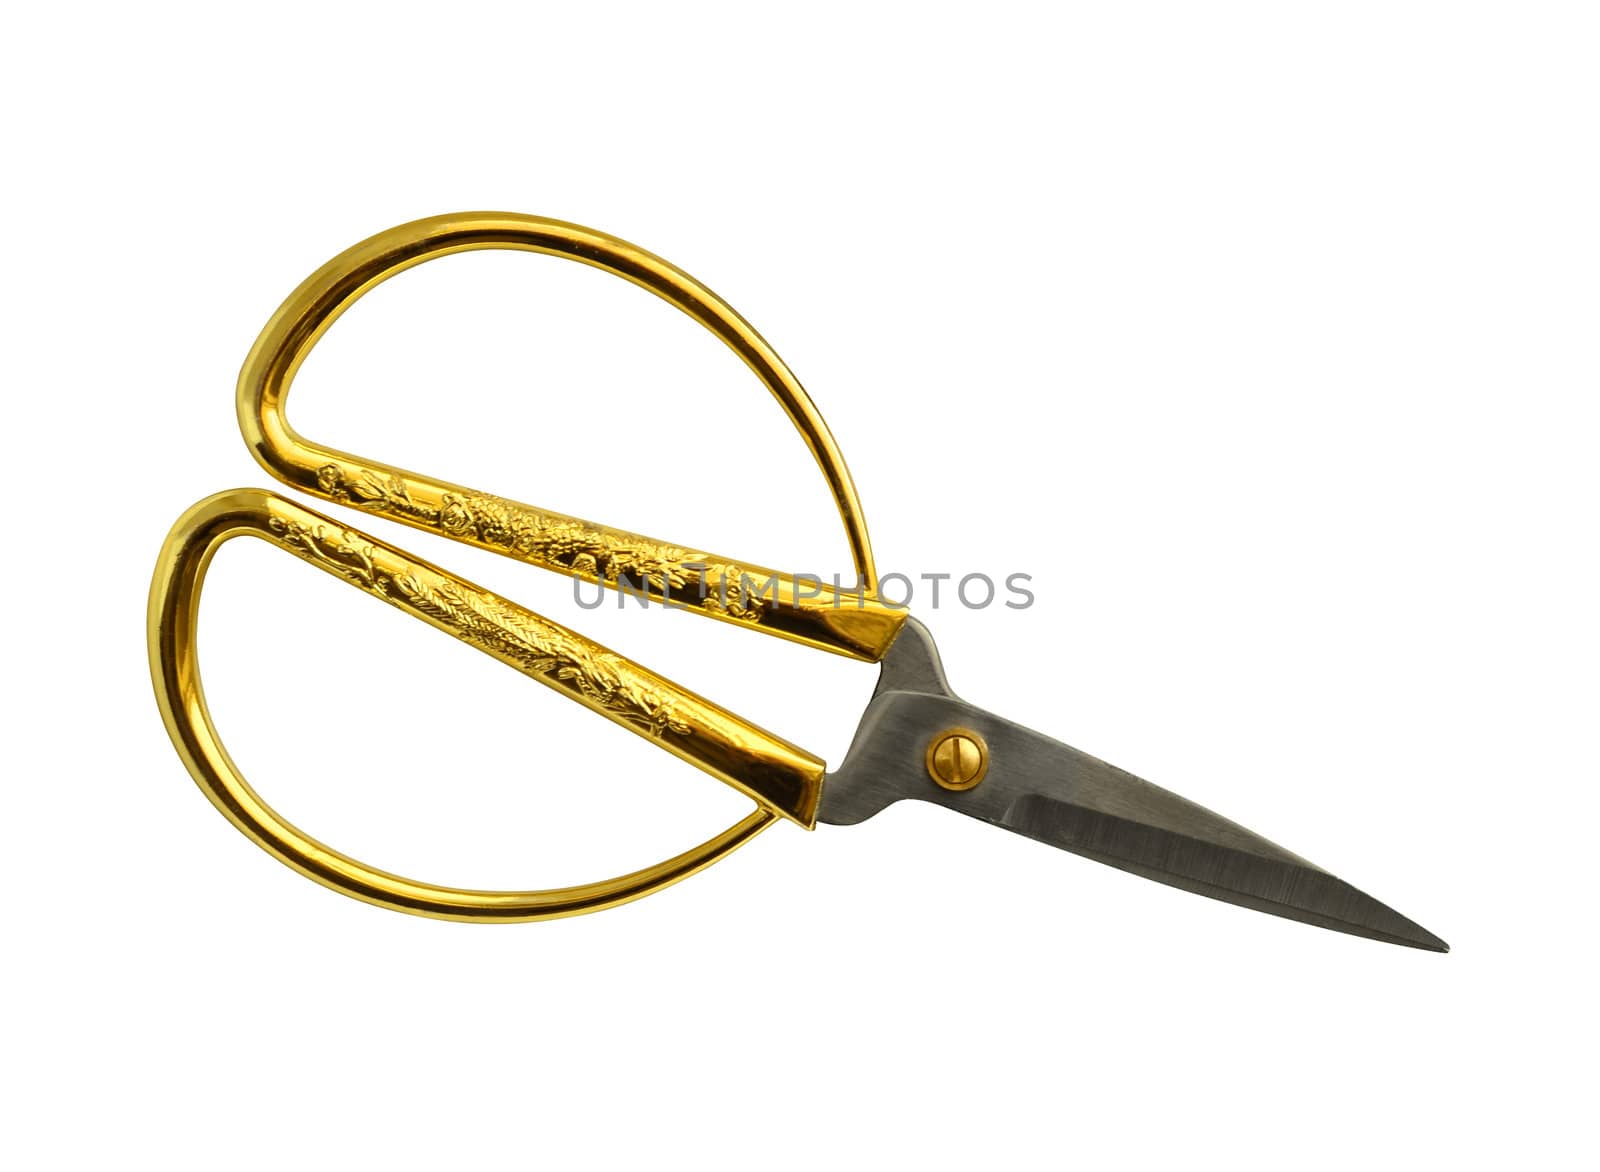 Traditional chinese scisors with gold plated handle. Isolated on white.